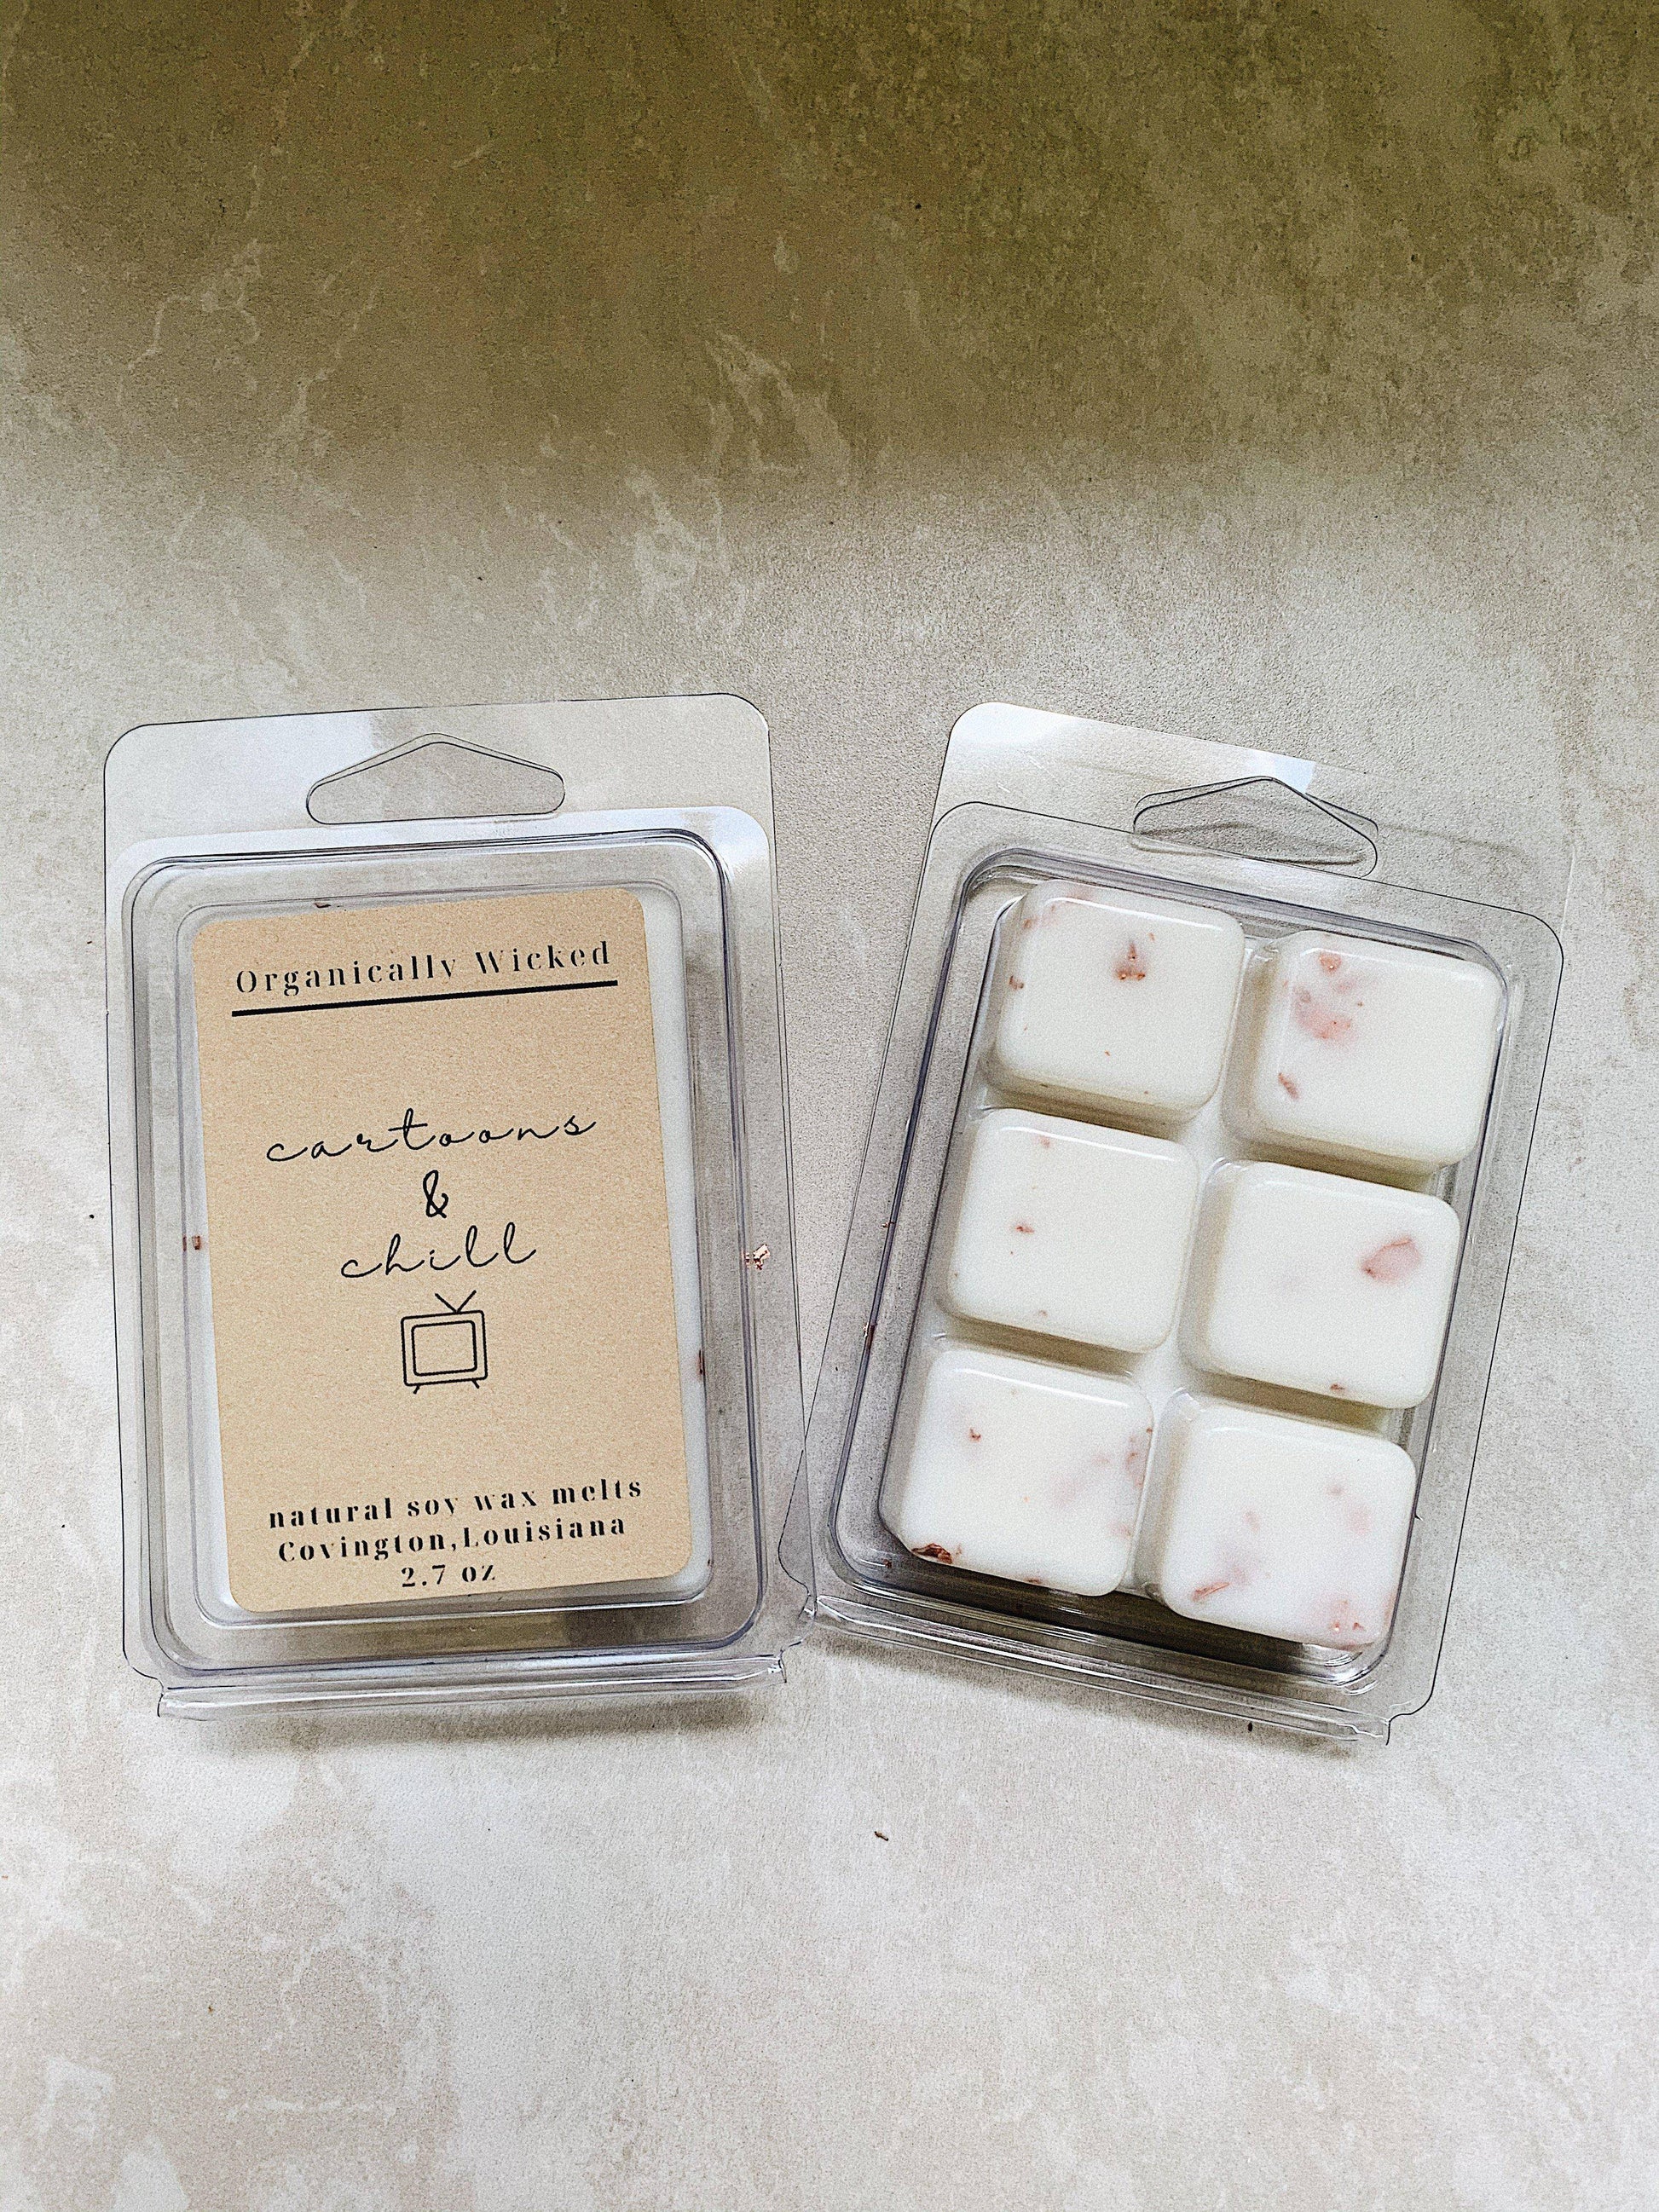 Pancake Variety Box Wax Melts. Highly Scented Soy Wax. 